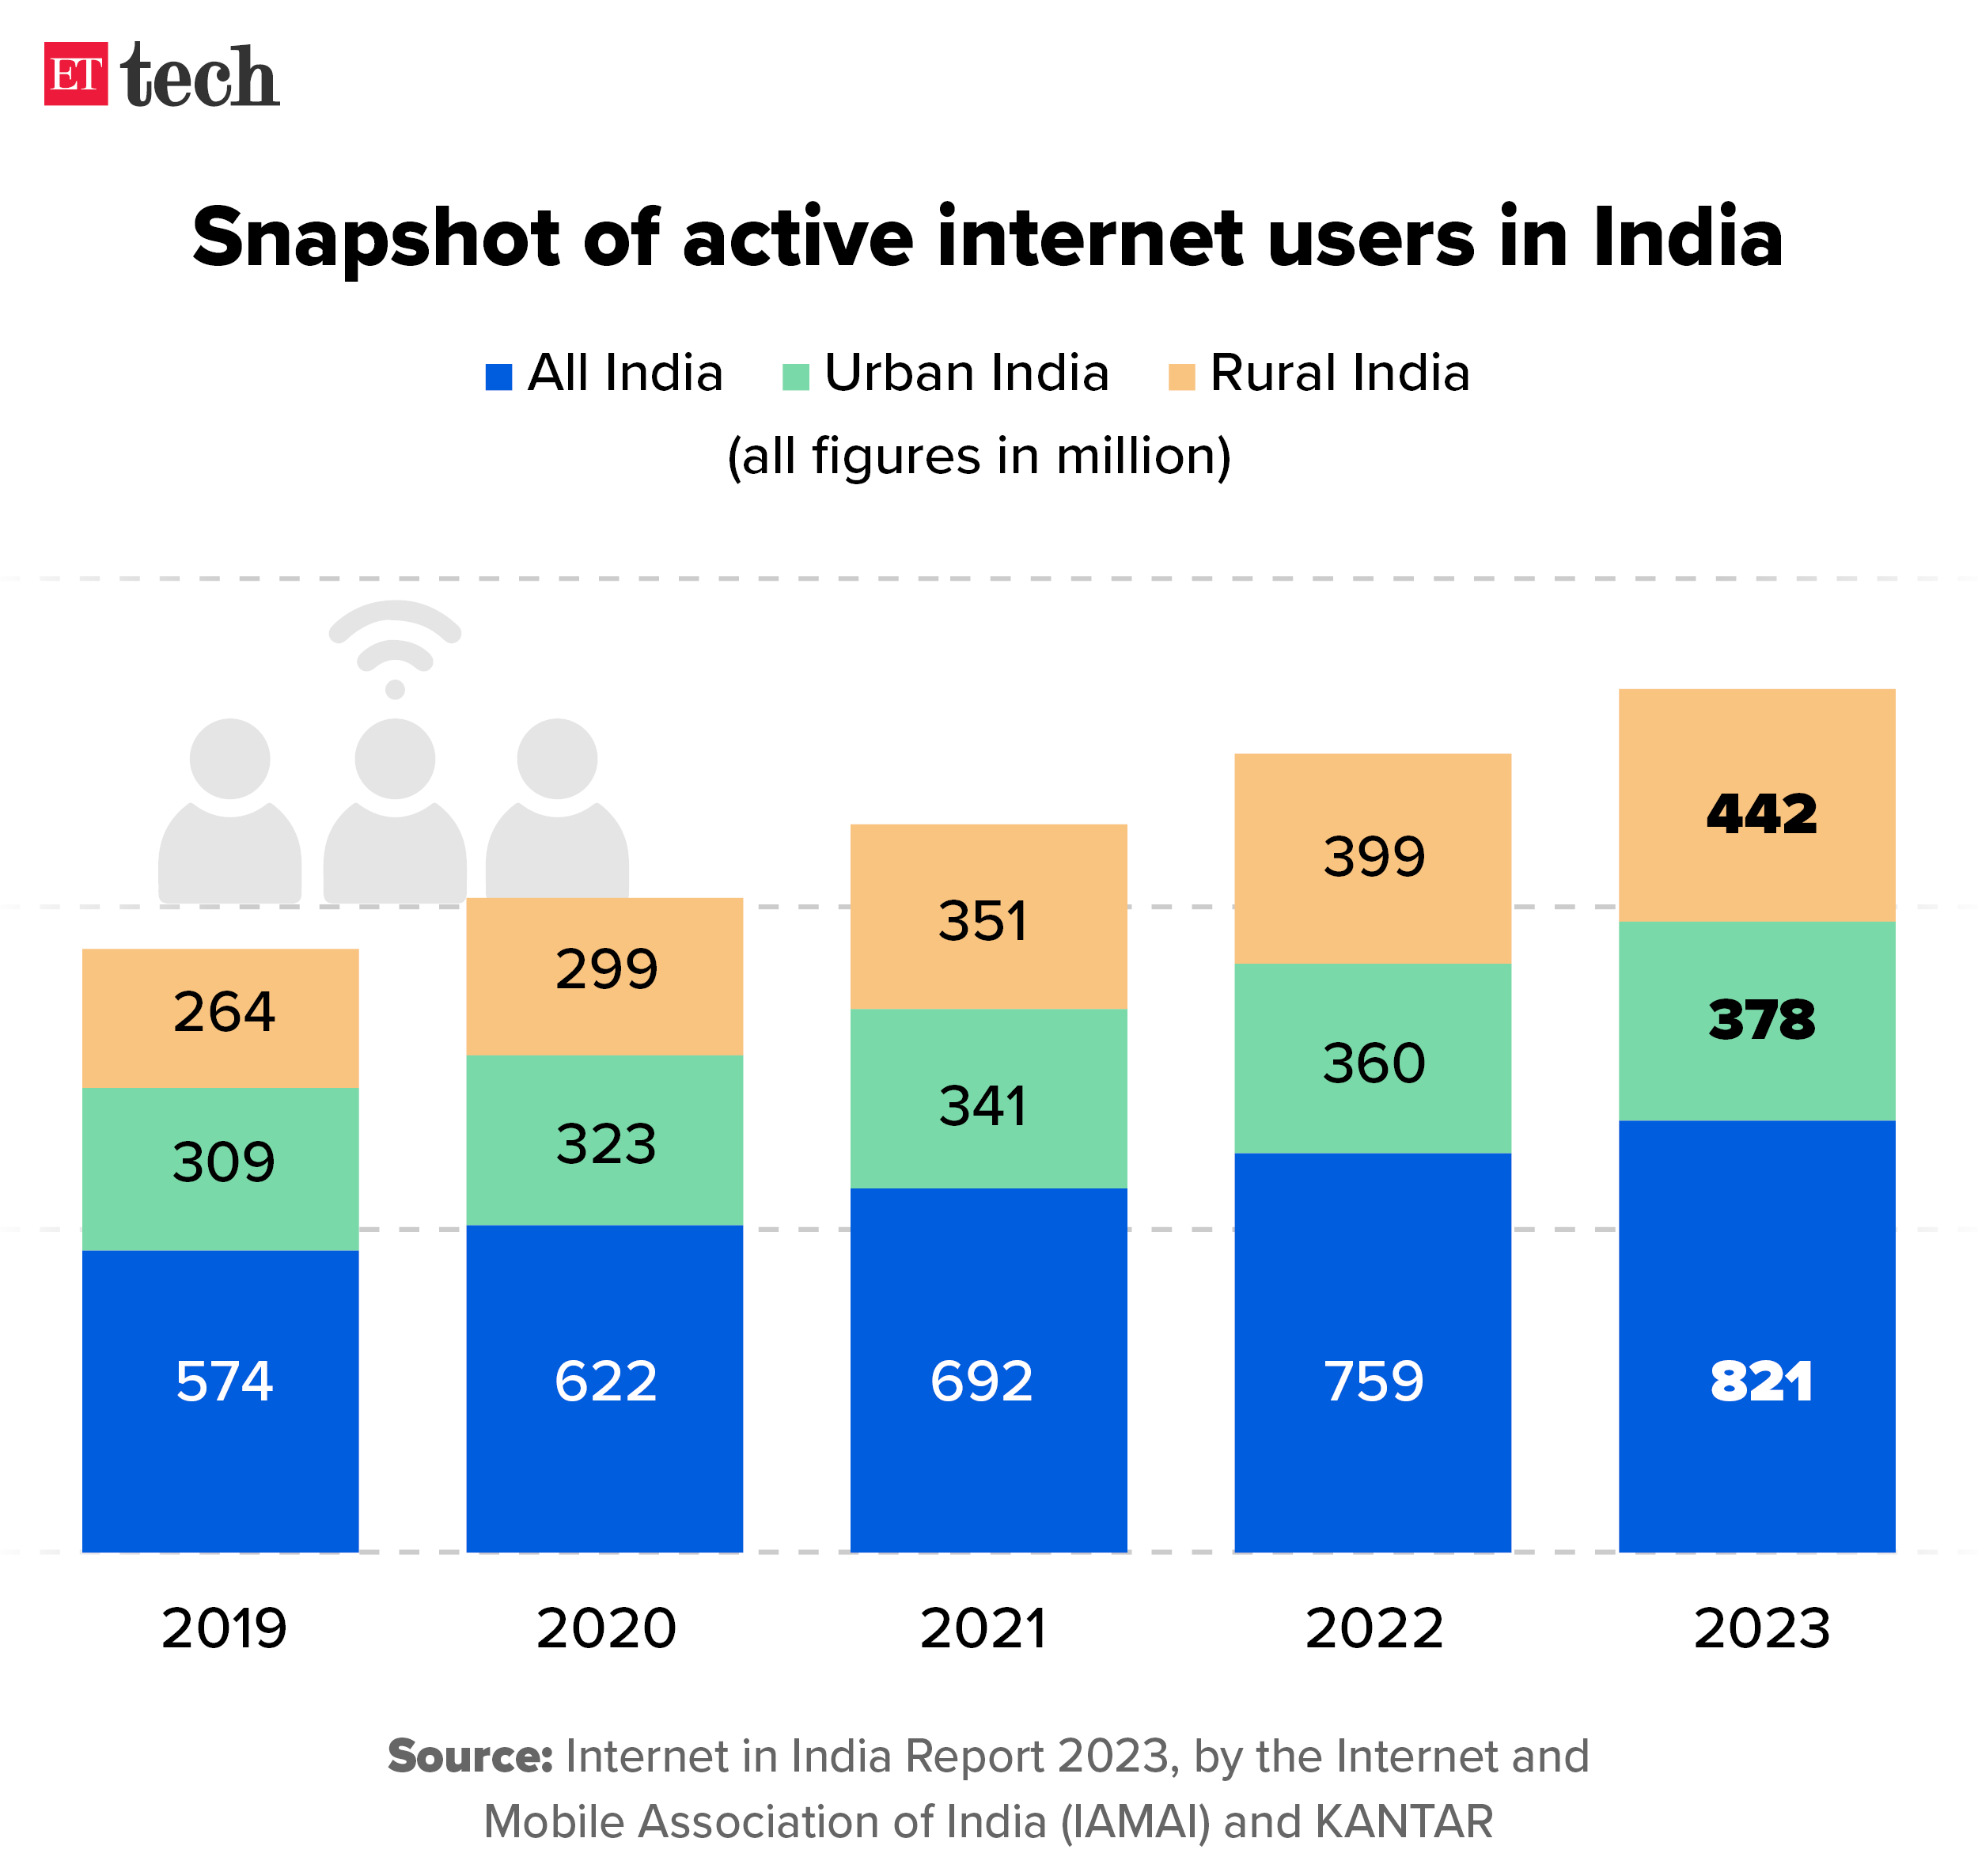 Snapshot of active internet users in India